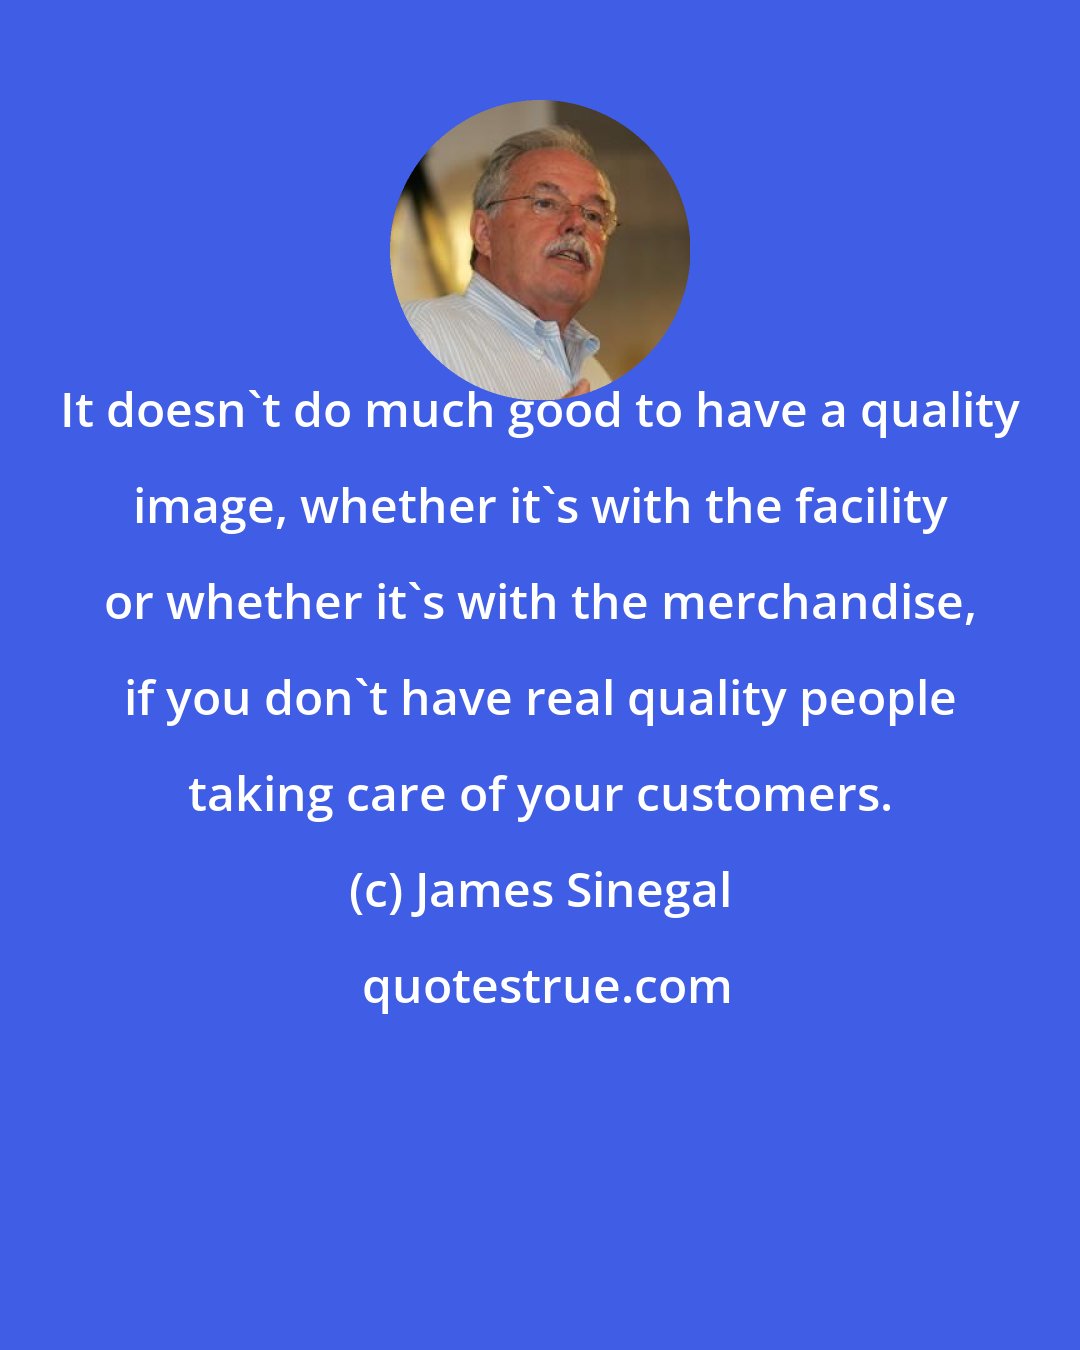 James Sinegal: It doesn't do much good to have a quality image, whether it's with the facility or whether it's with the merchandise, if you don't have real quality people taking care of your customers.